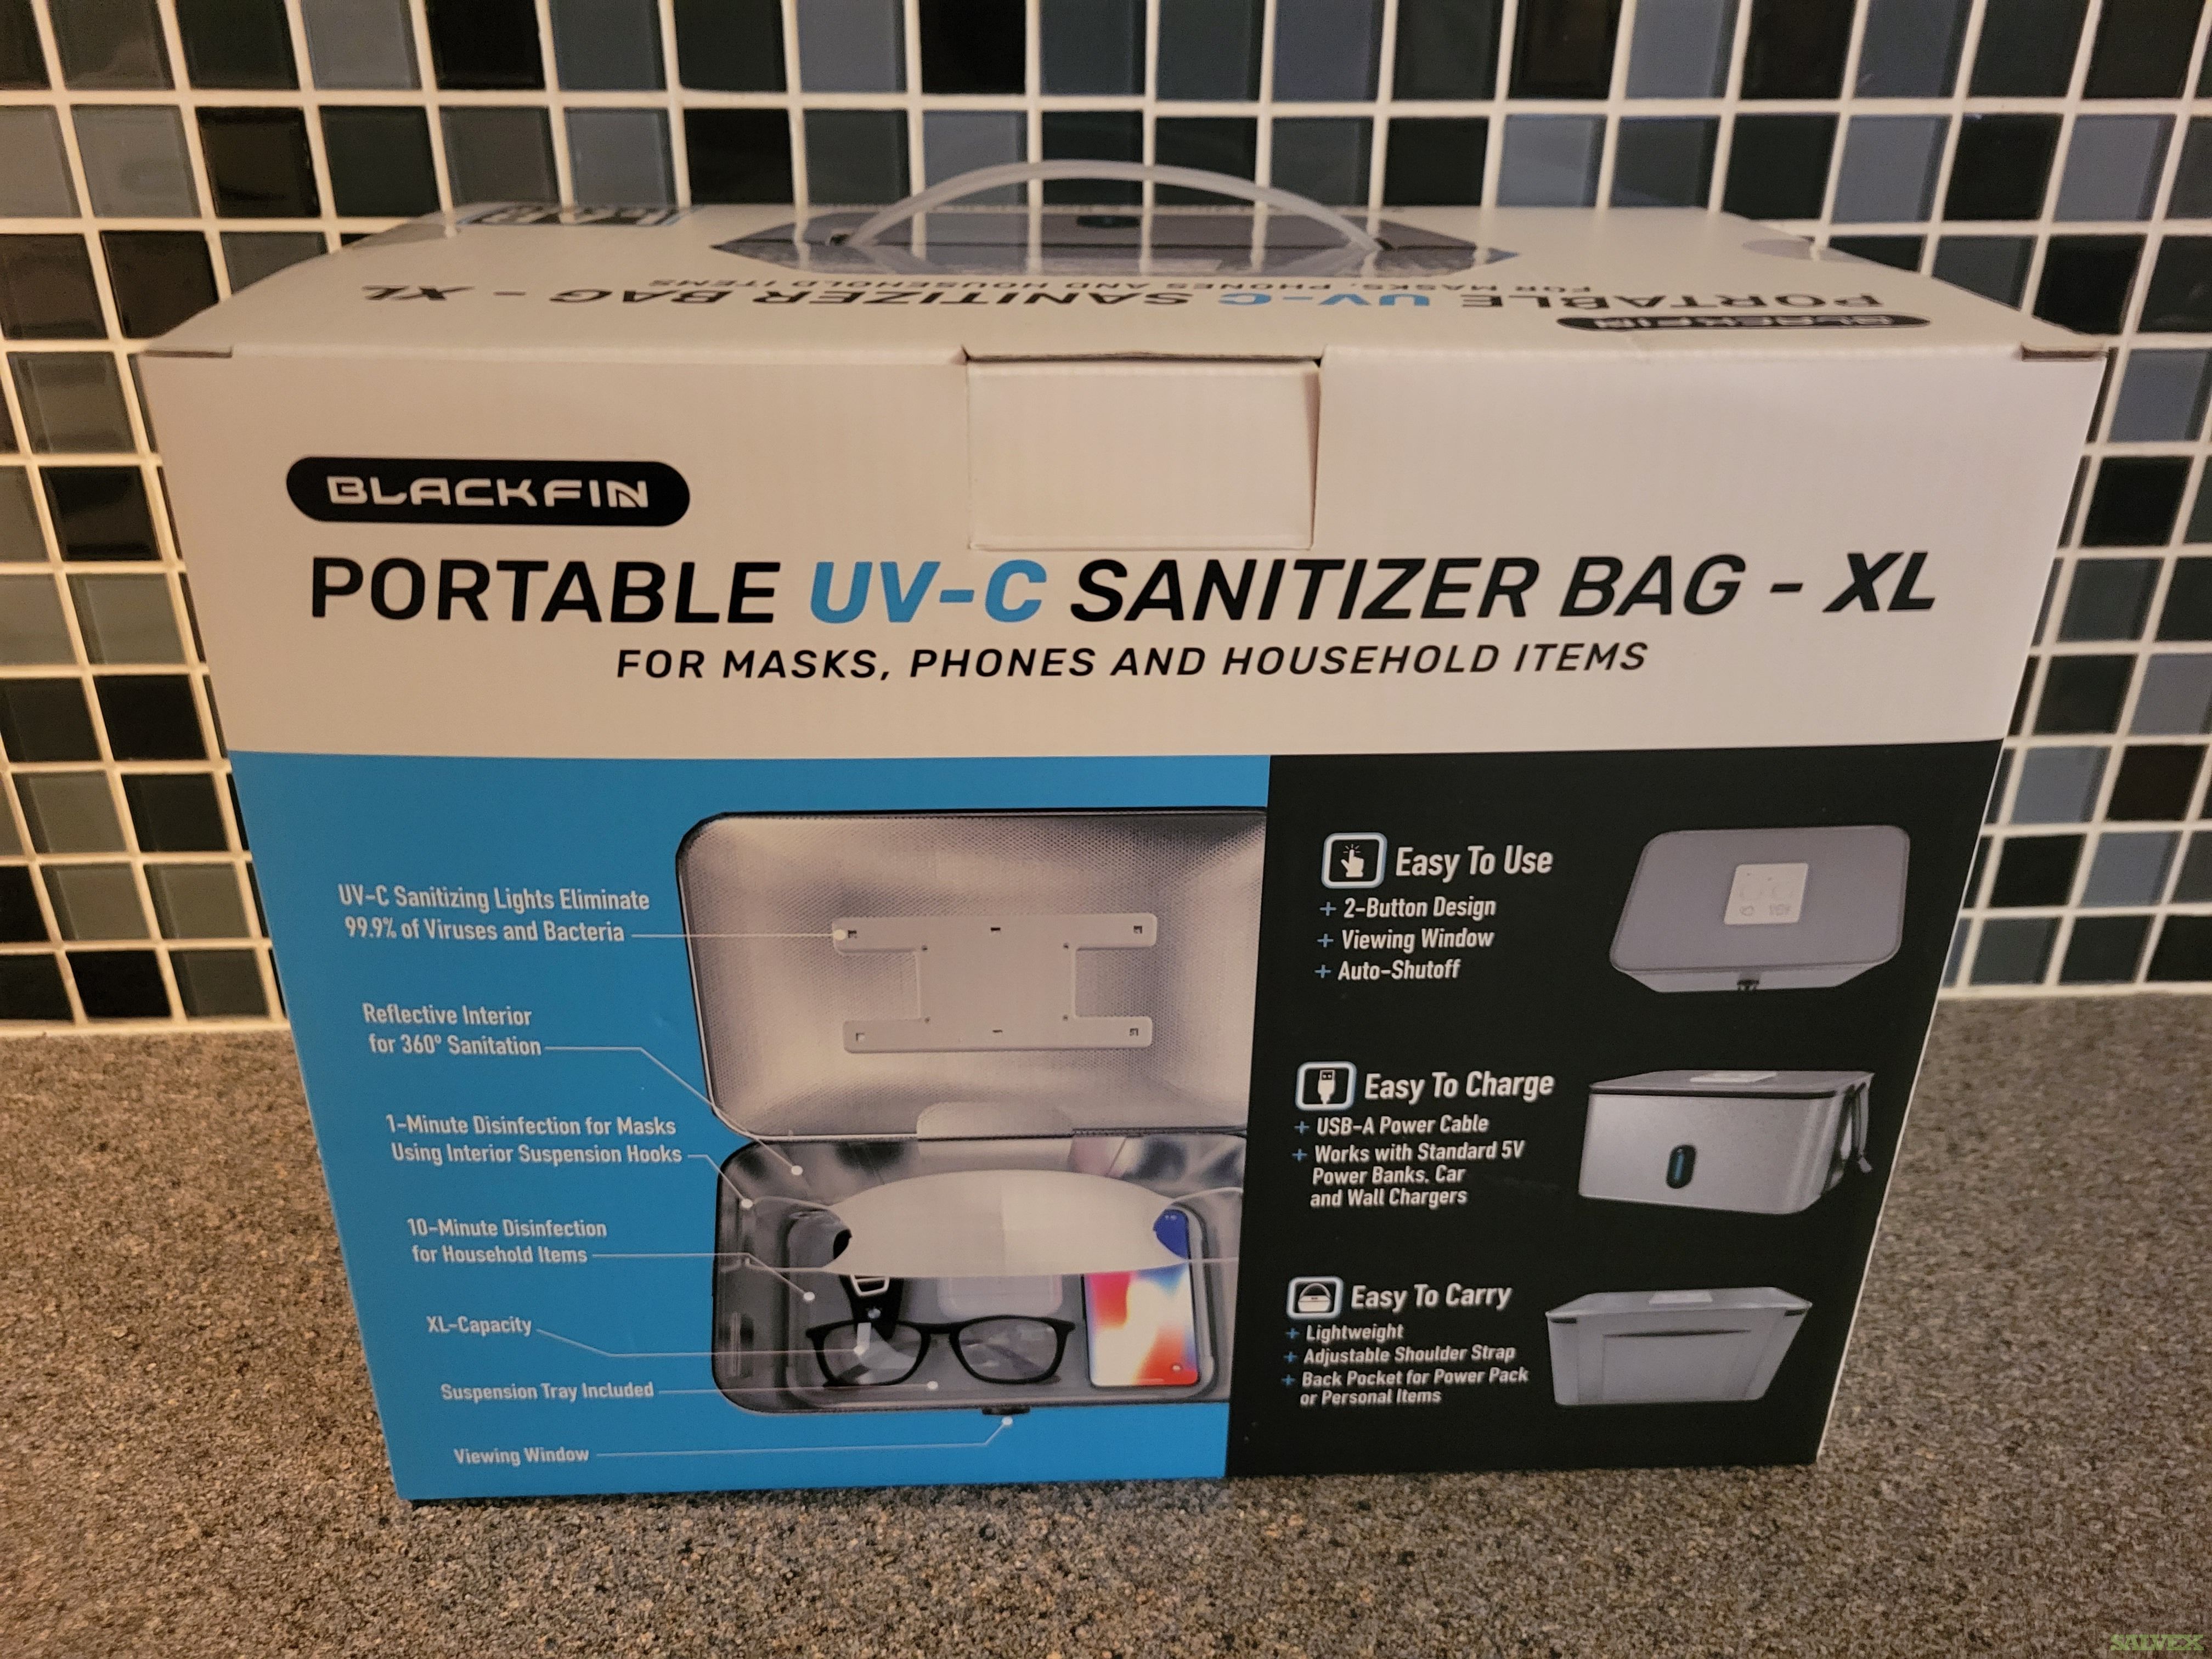 Sanitizer & Sterilizer Portable, Multi Item Bag by Black Fin with UV-C Lights - XL (11,136 Units) in Wisconsin (QUICK PICKUP)